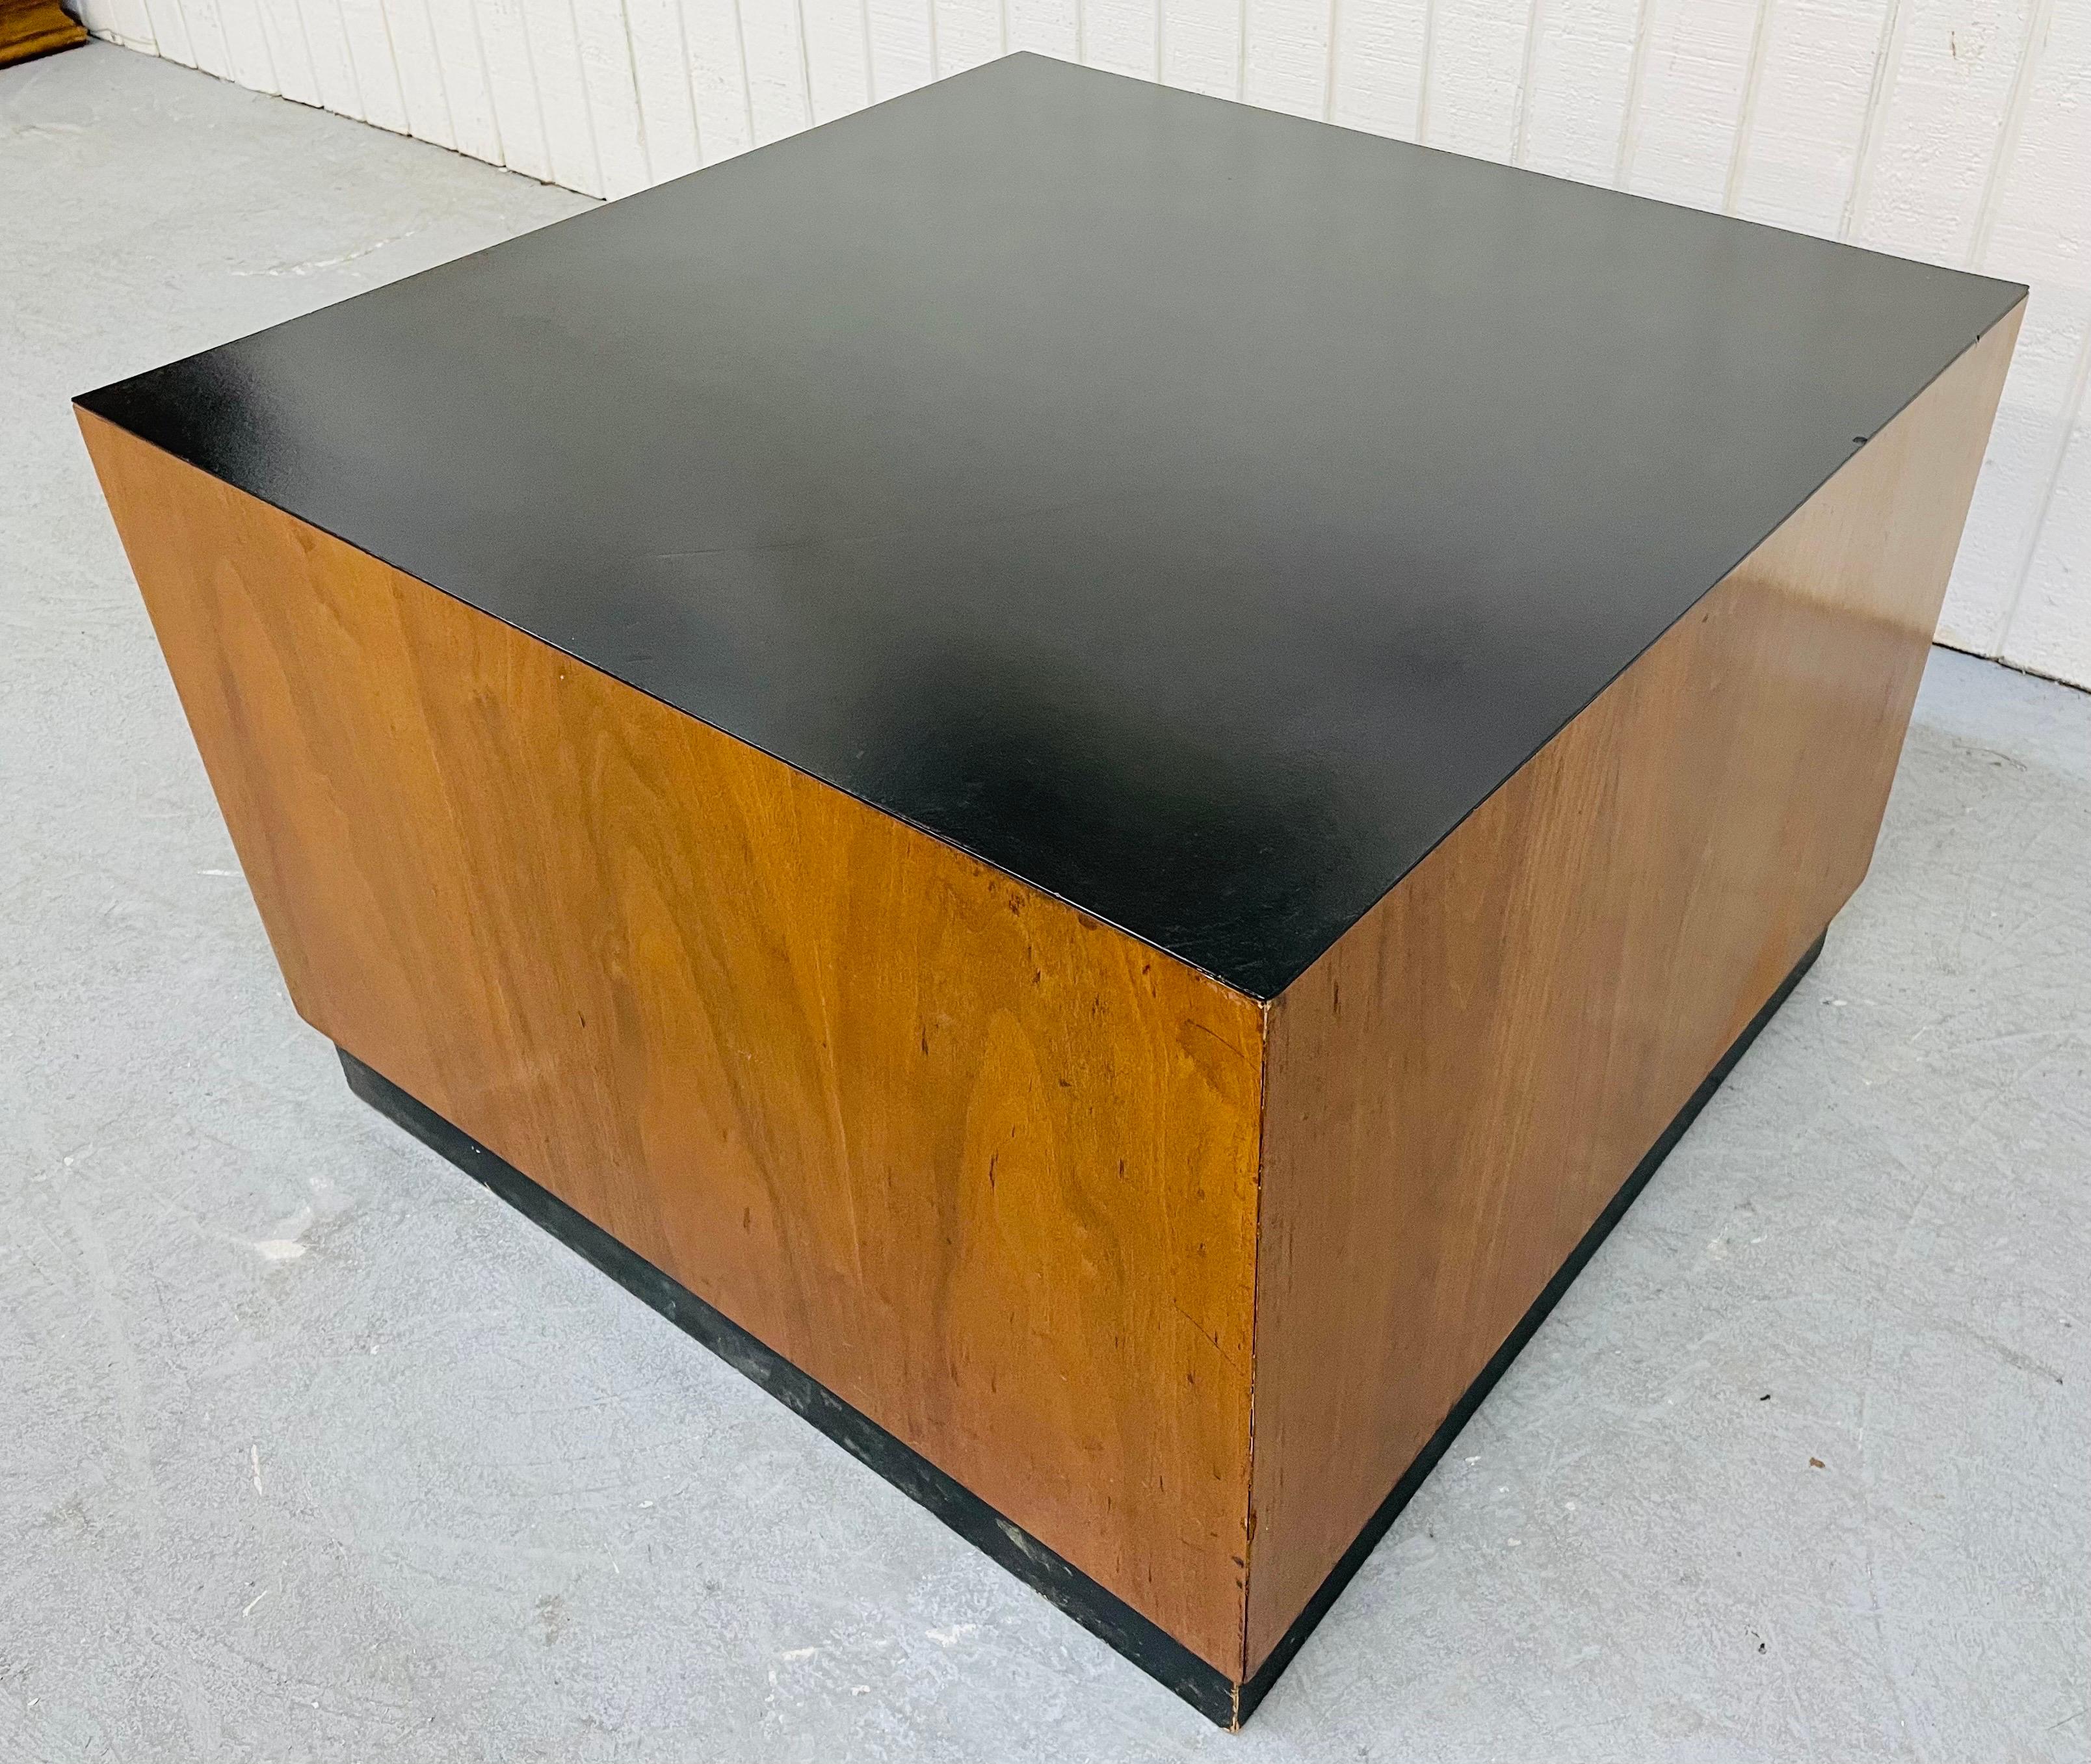 This listing is for a Mid-Century Milo Baughman Style Walnut Cube Coffee Table. Featuring a black laminated square top, walnut cube body, and black plinth base.